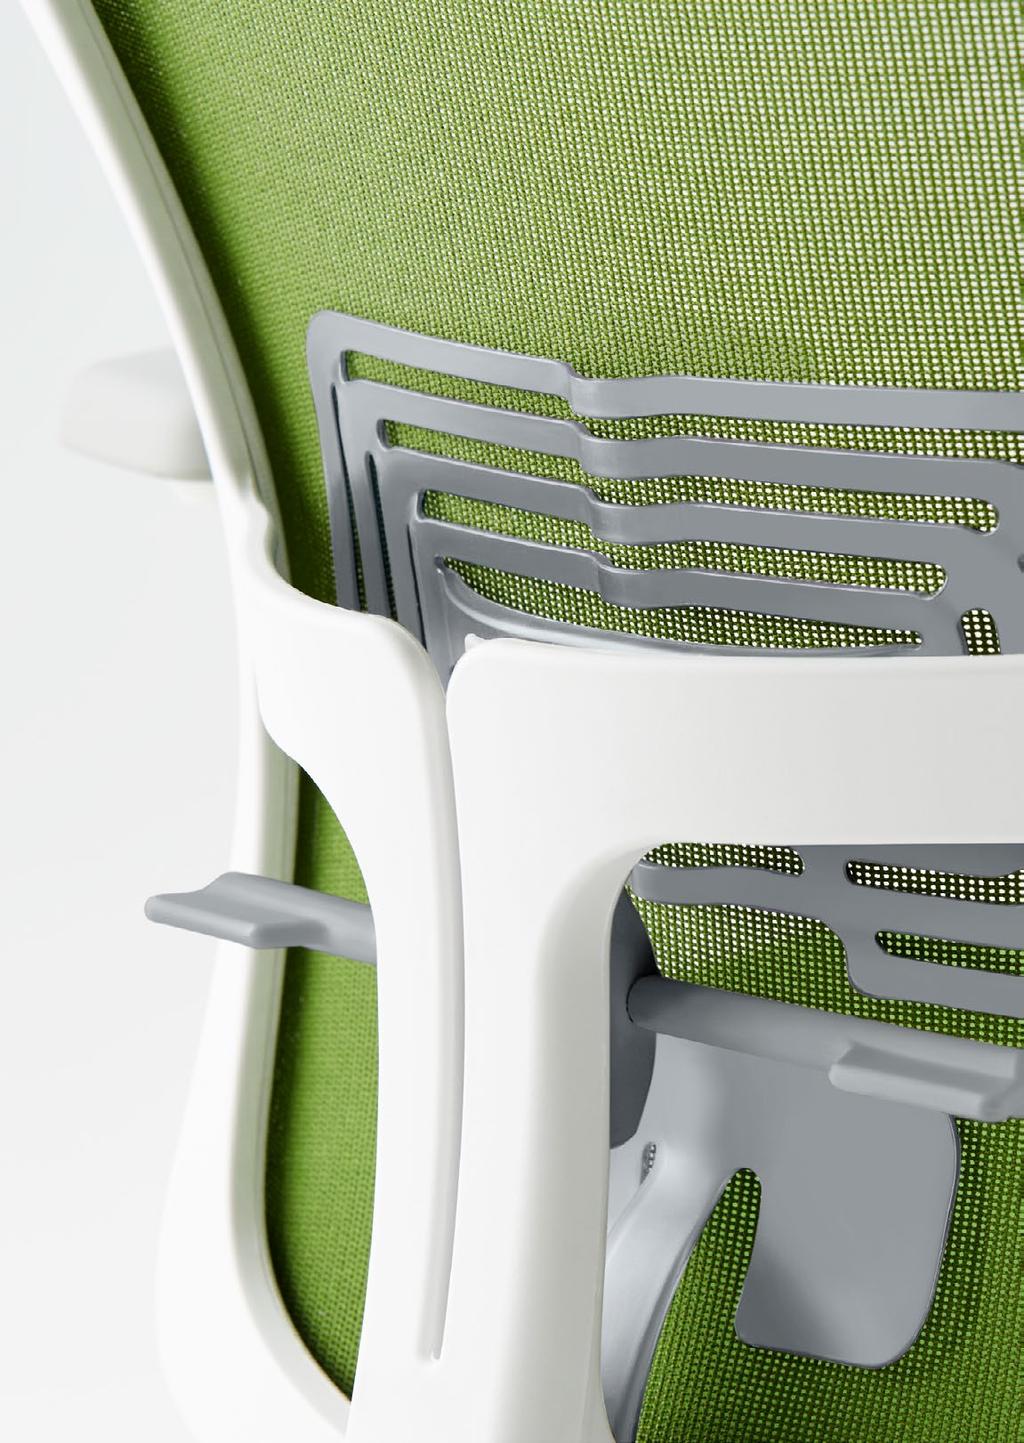 office needs. Zody is intuitively adjustable, starting with the advanced features that support your lower back.